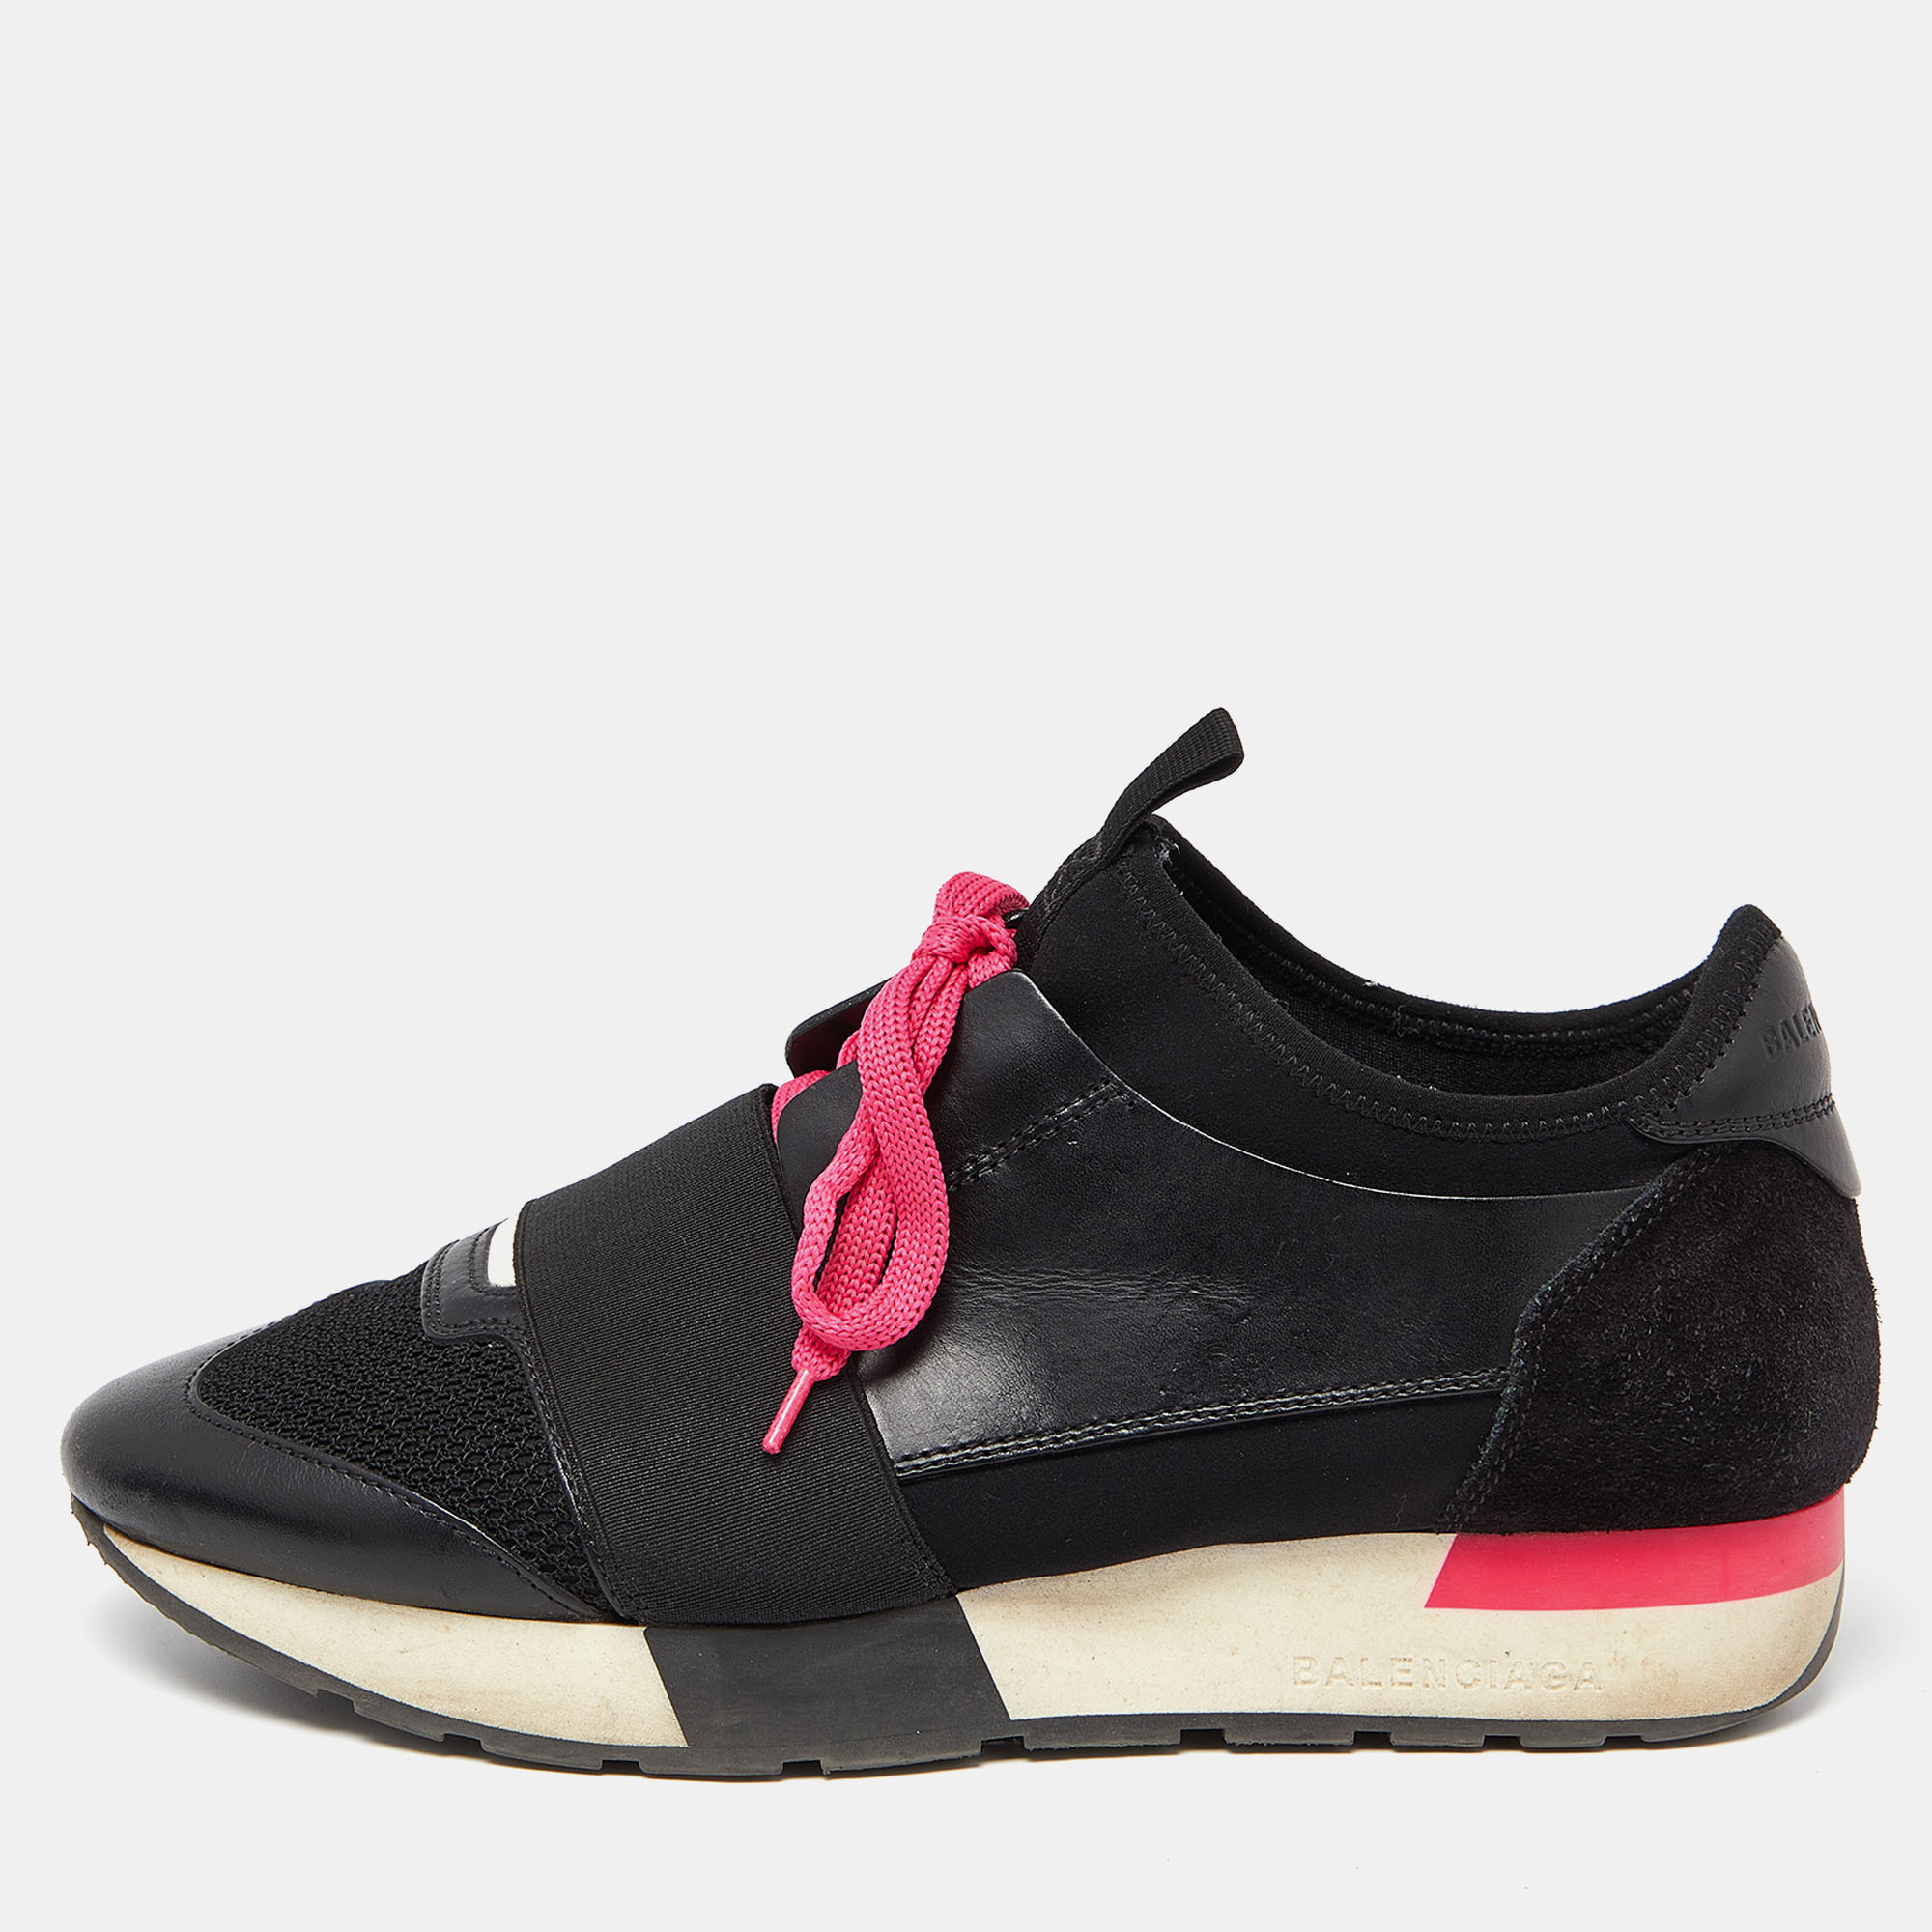 Balenciaga black/pink leather,suede and mesh race runner sneakers size 37